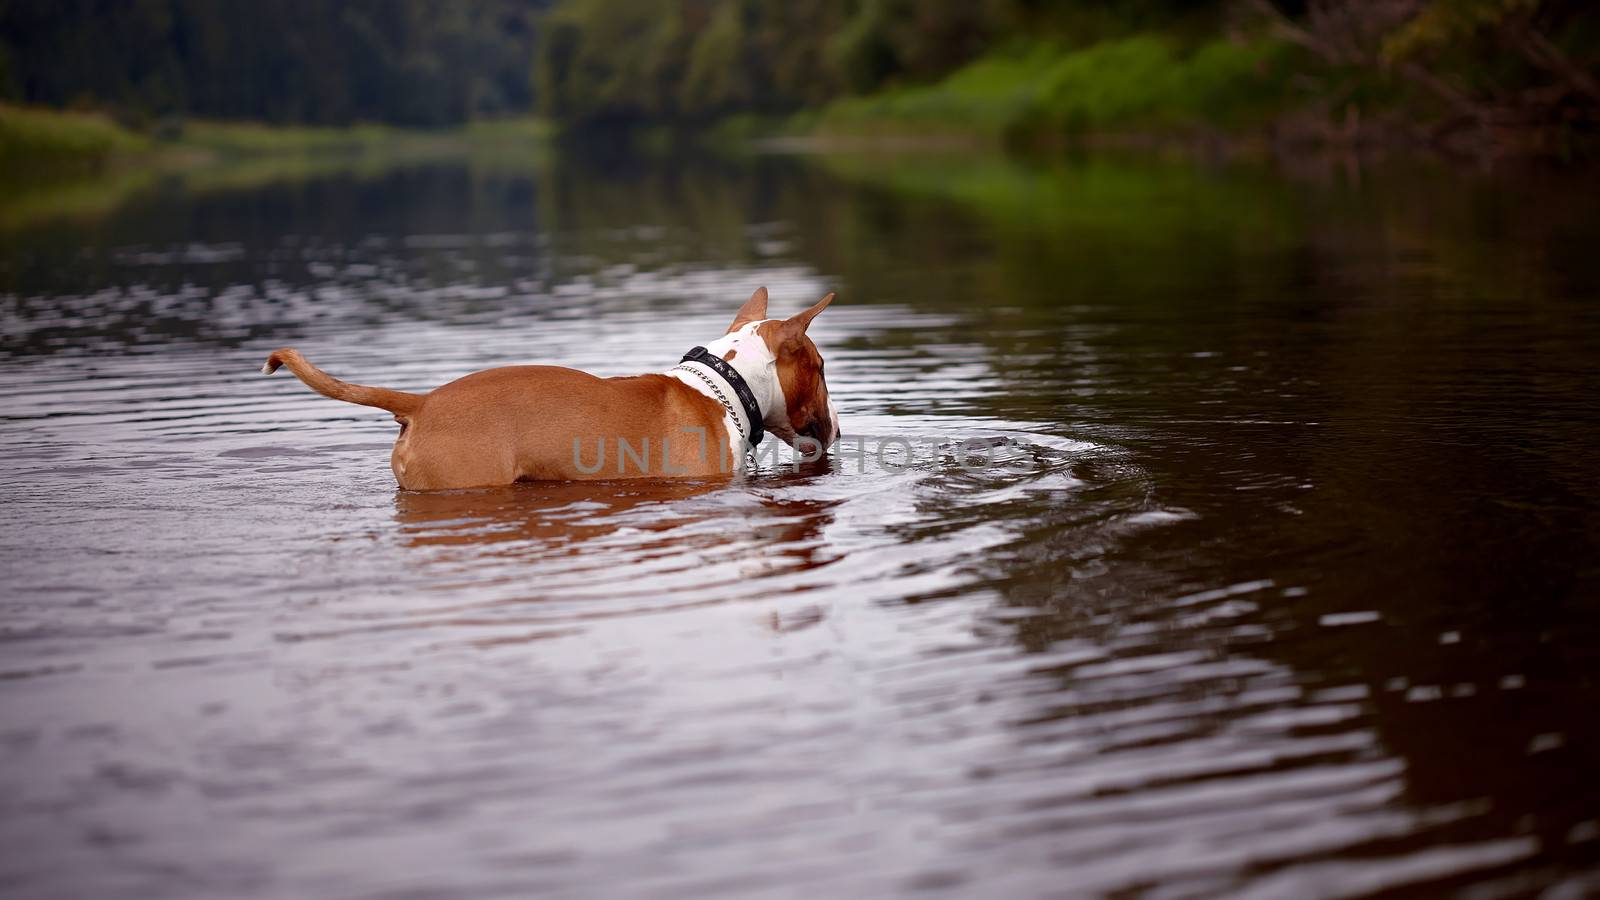 English bull terrier. Thoroughbred dog. Canine friend. Red dog. The bull terrier plays in the river